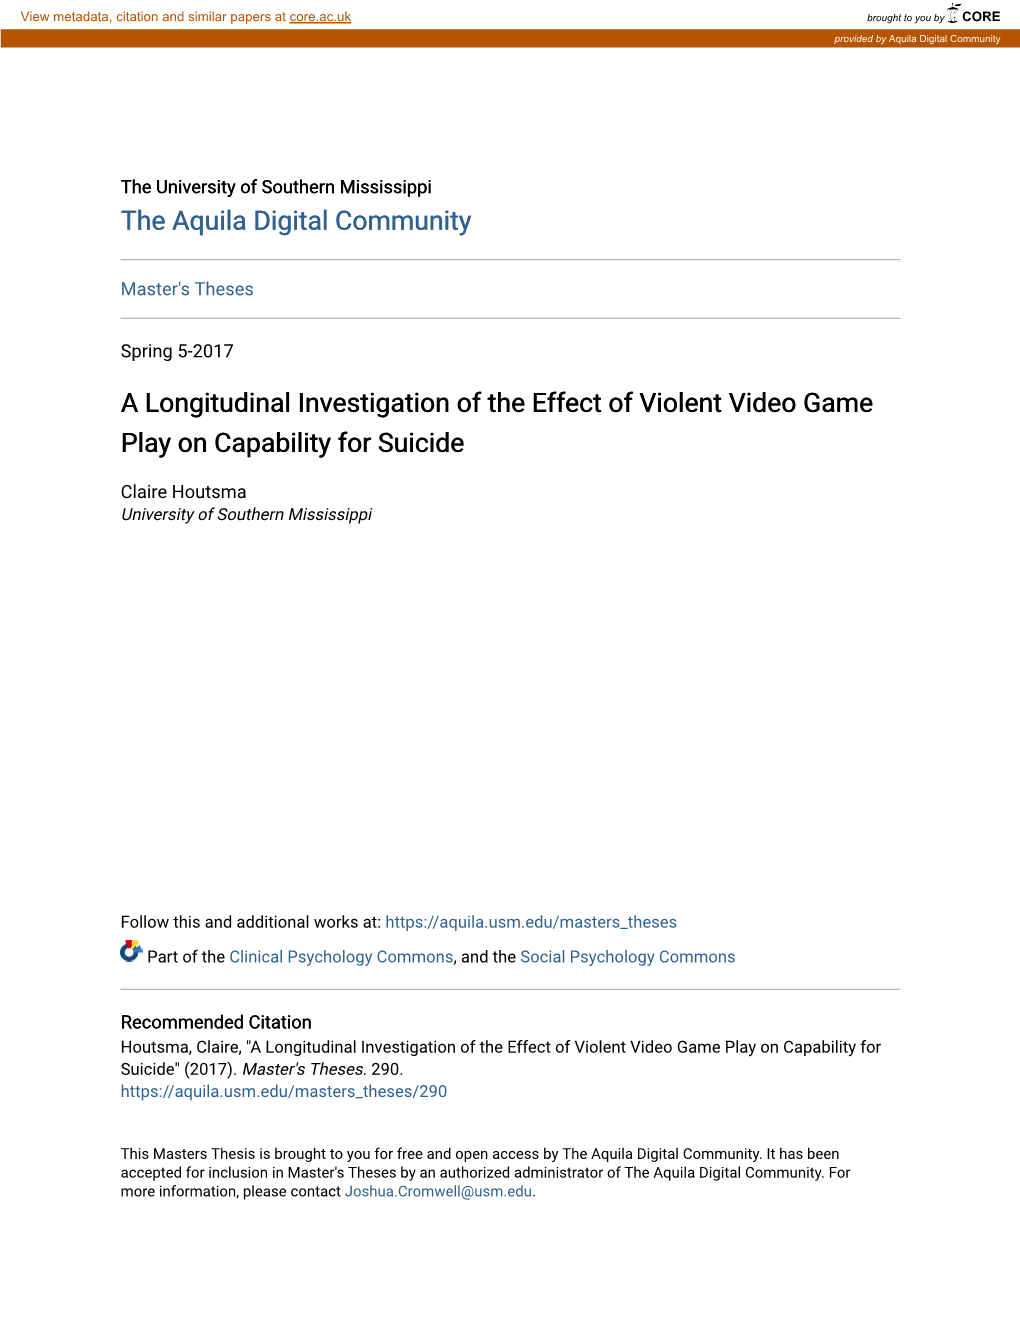 A Longitudinal Investigation of the Effect of Violent Video Game Play on Capability for Suicide